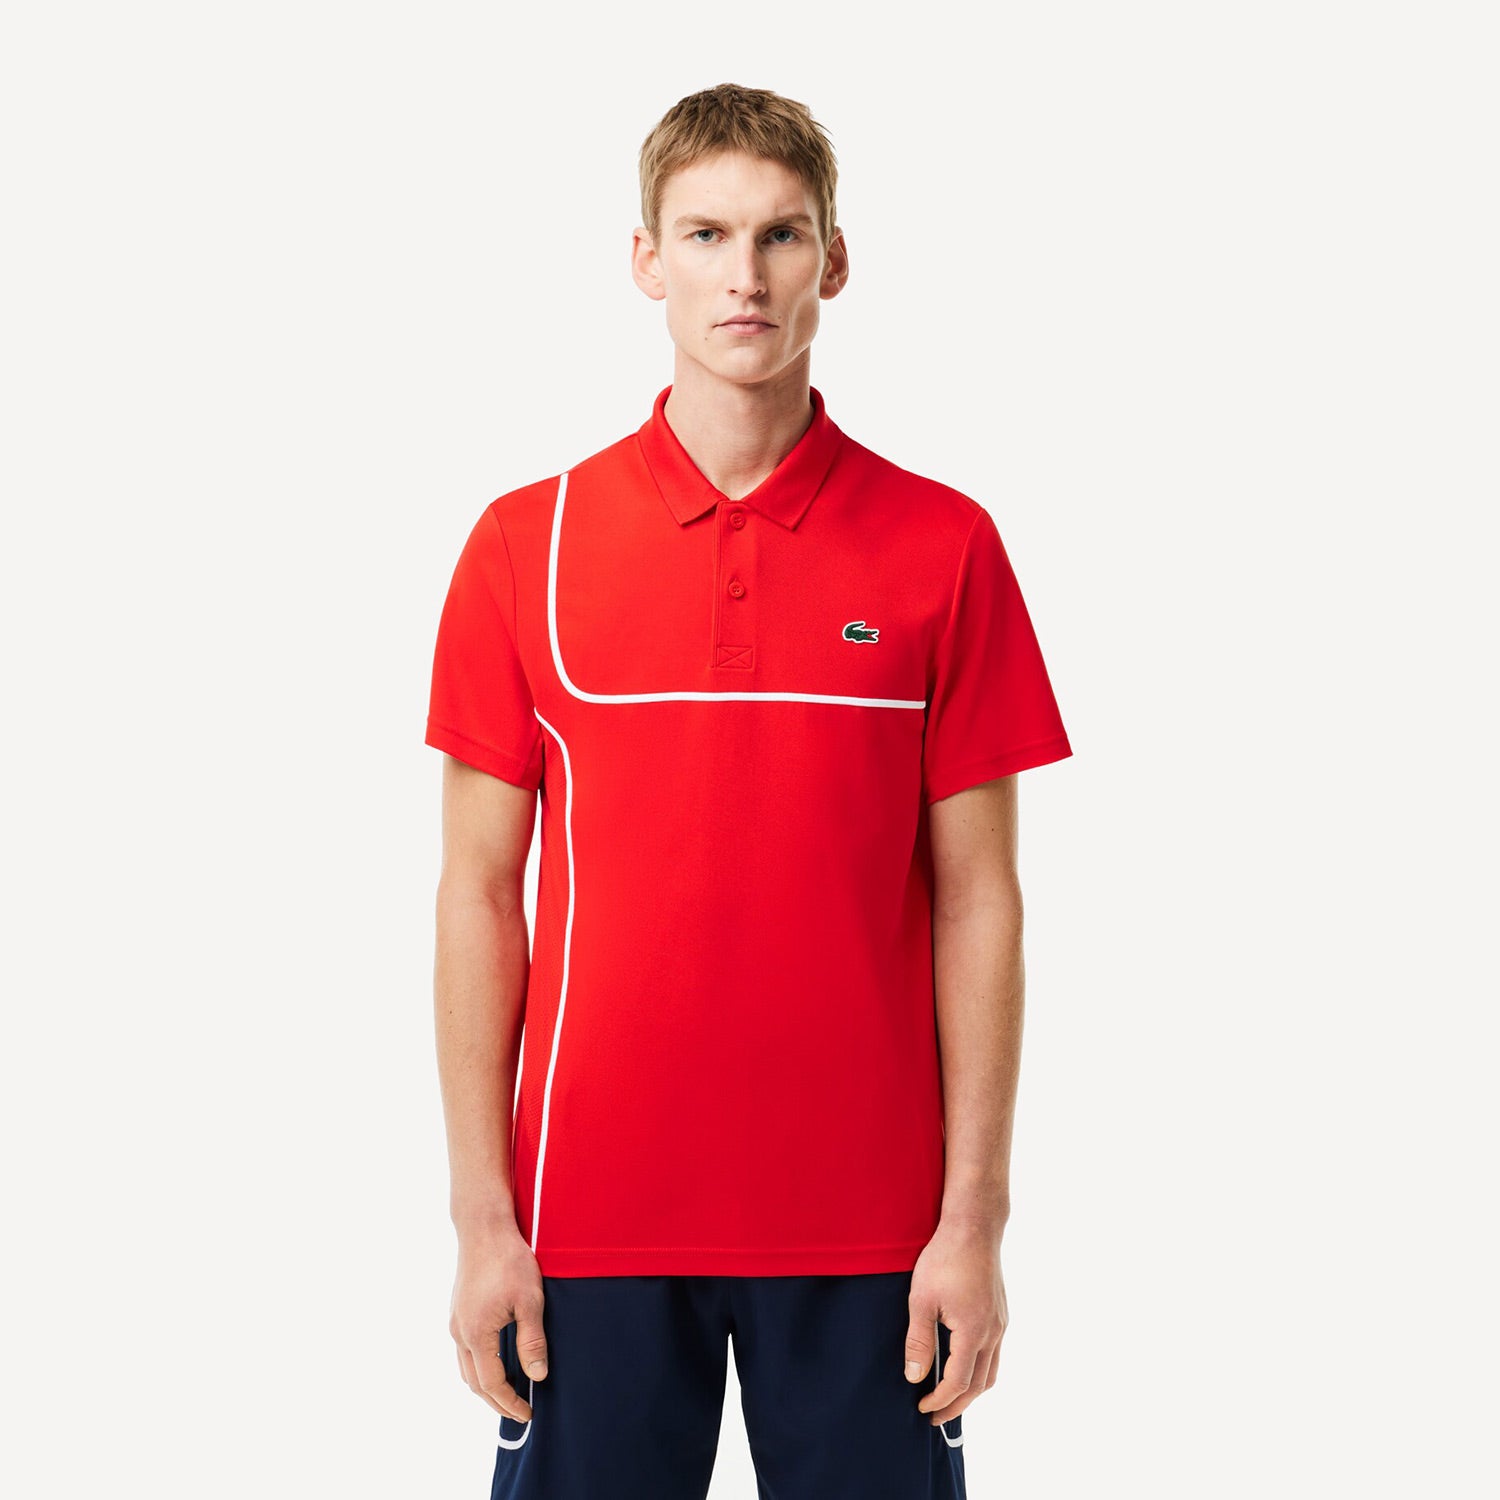 Lacoste Men's Ultra Dry Tennis Polo - Red (1)